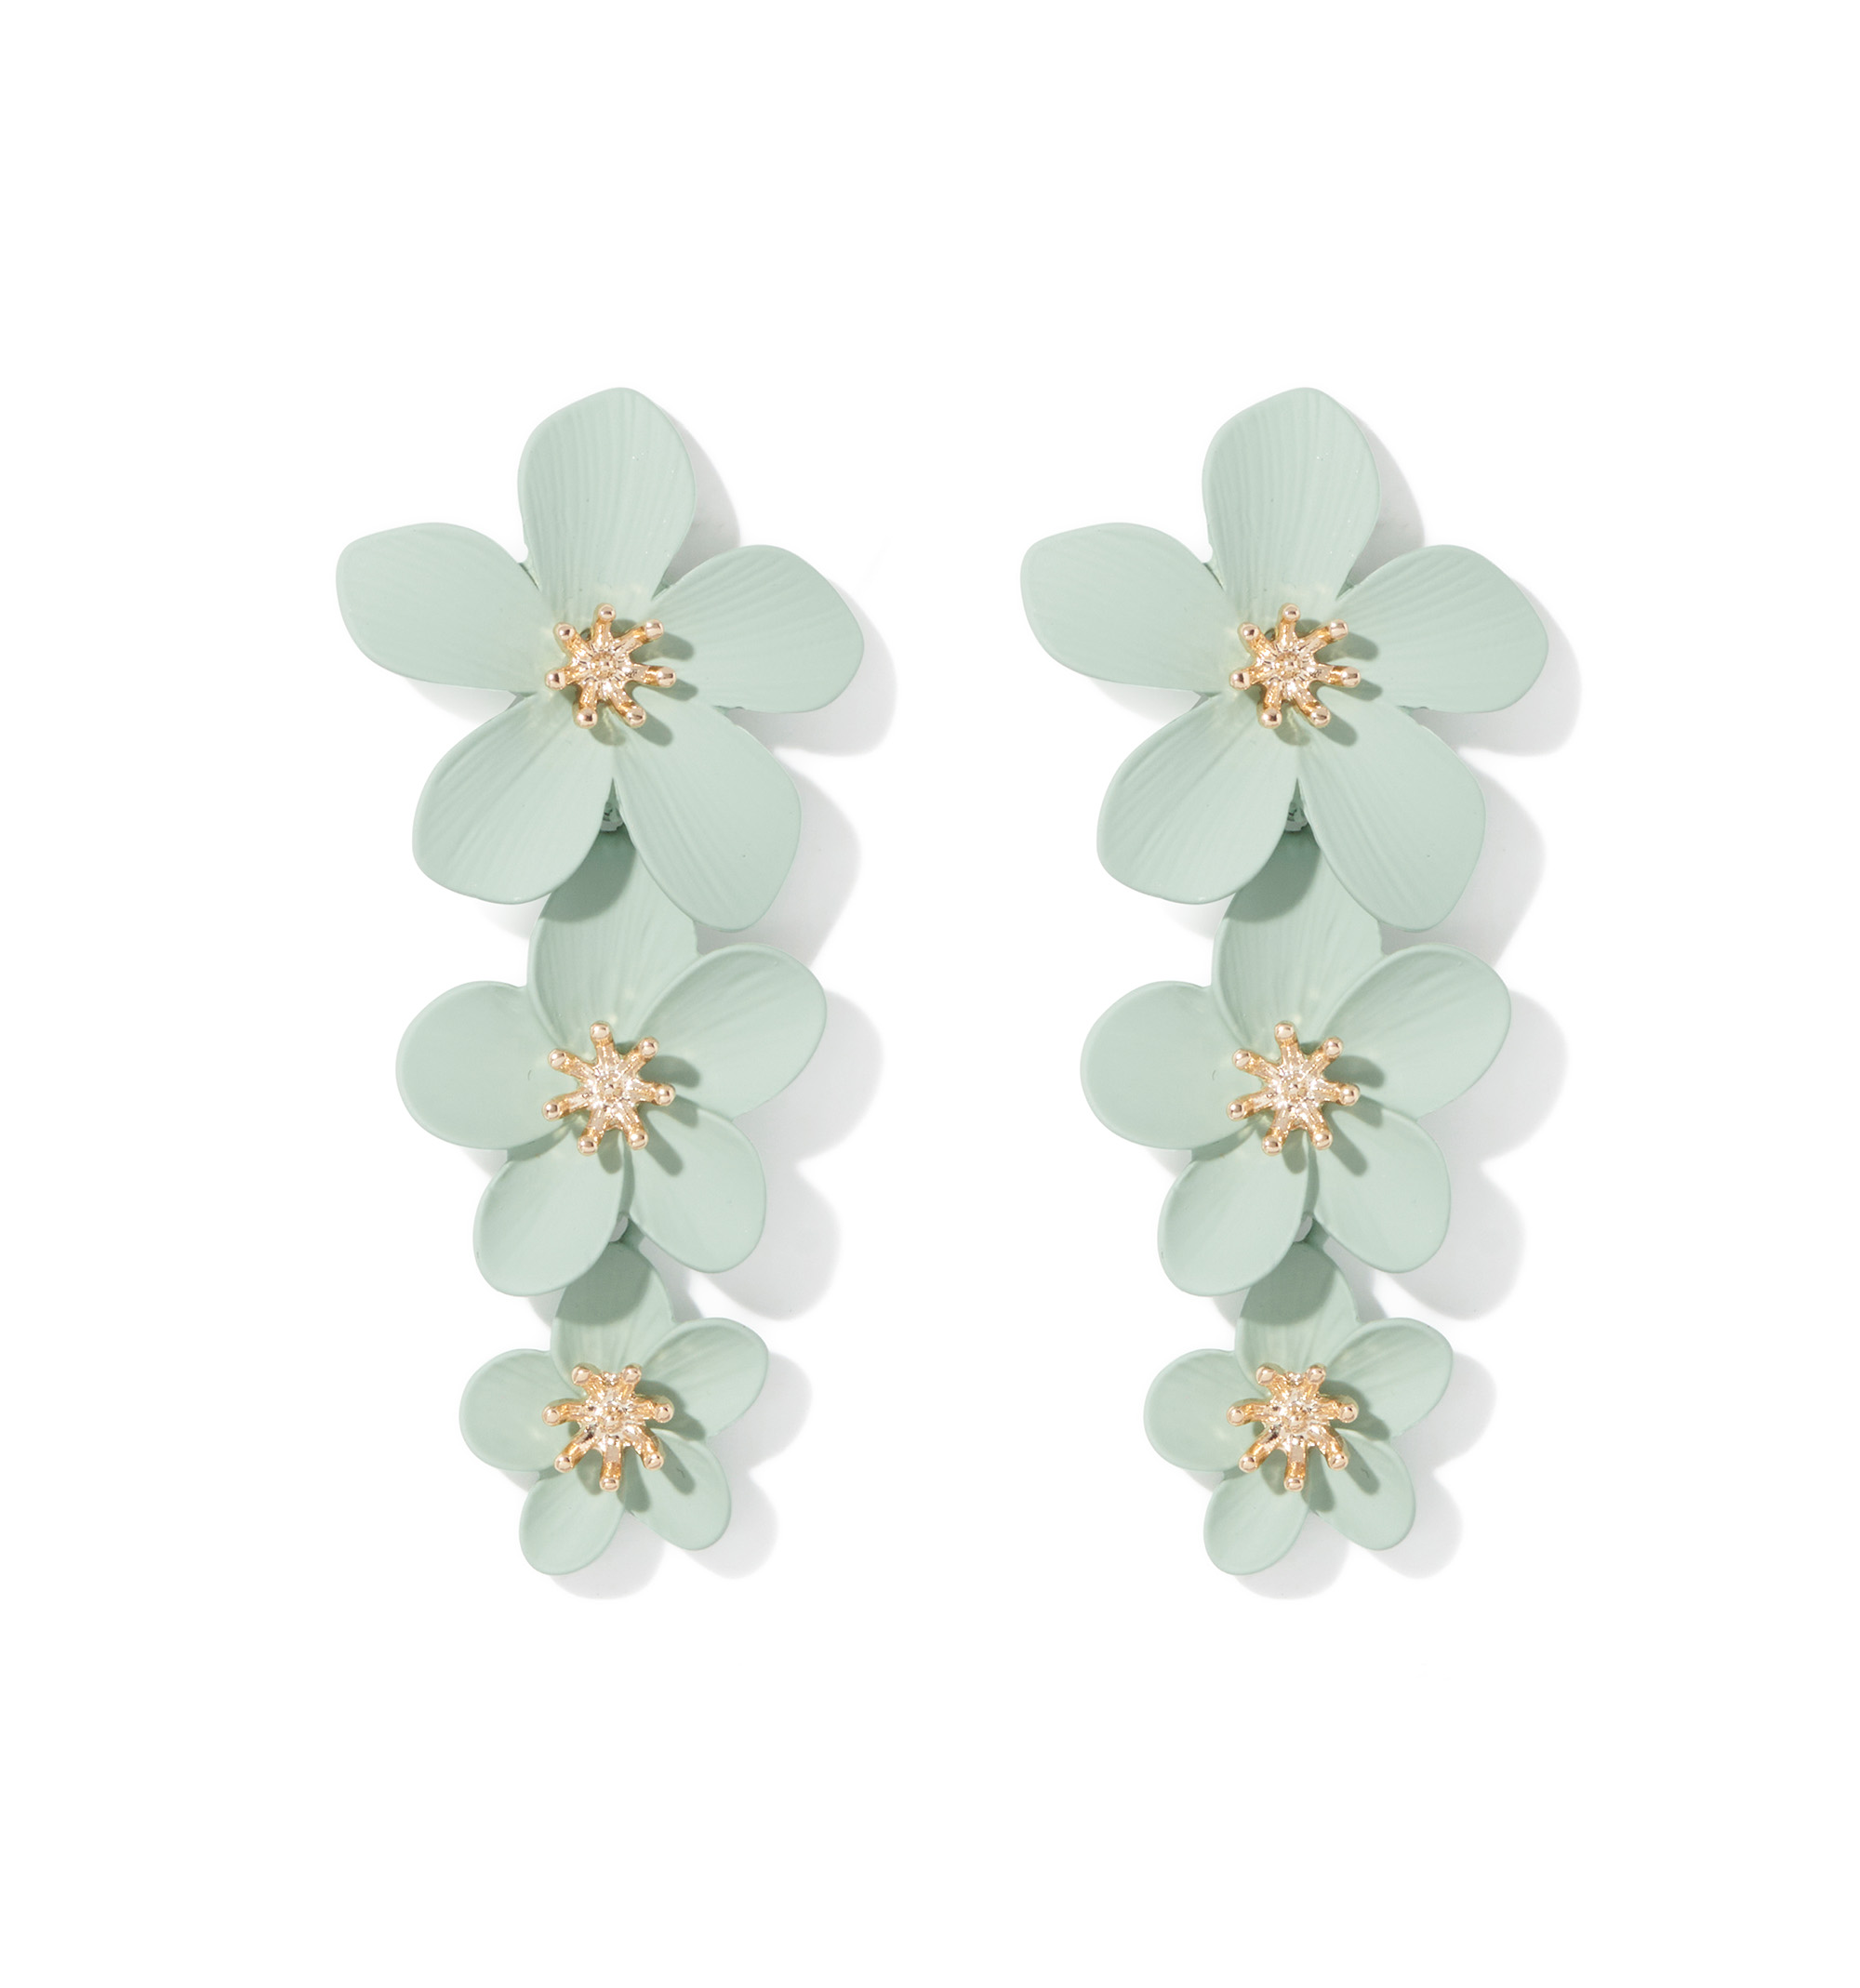 Flipkart.com - Buy YELLOW CHIMES Beautiful Flower Design Pearl Crystal Stud  Earrings For Women Pearl Alloy Stud Earring Online at Best Prices in India